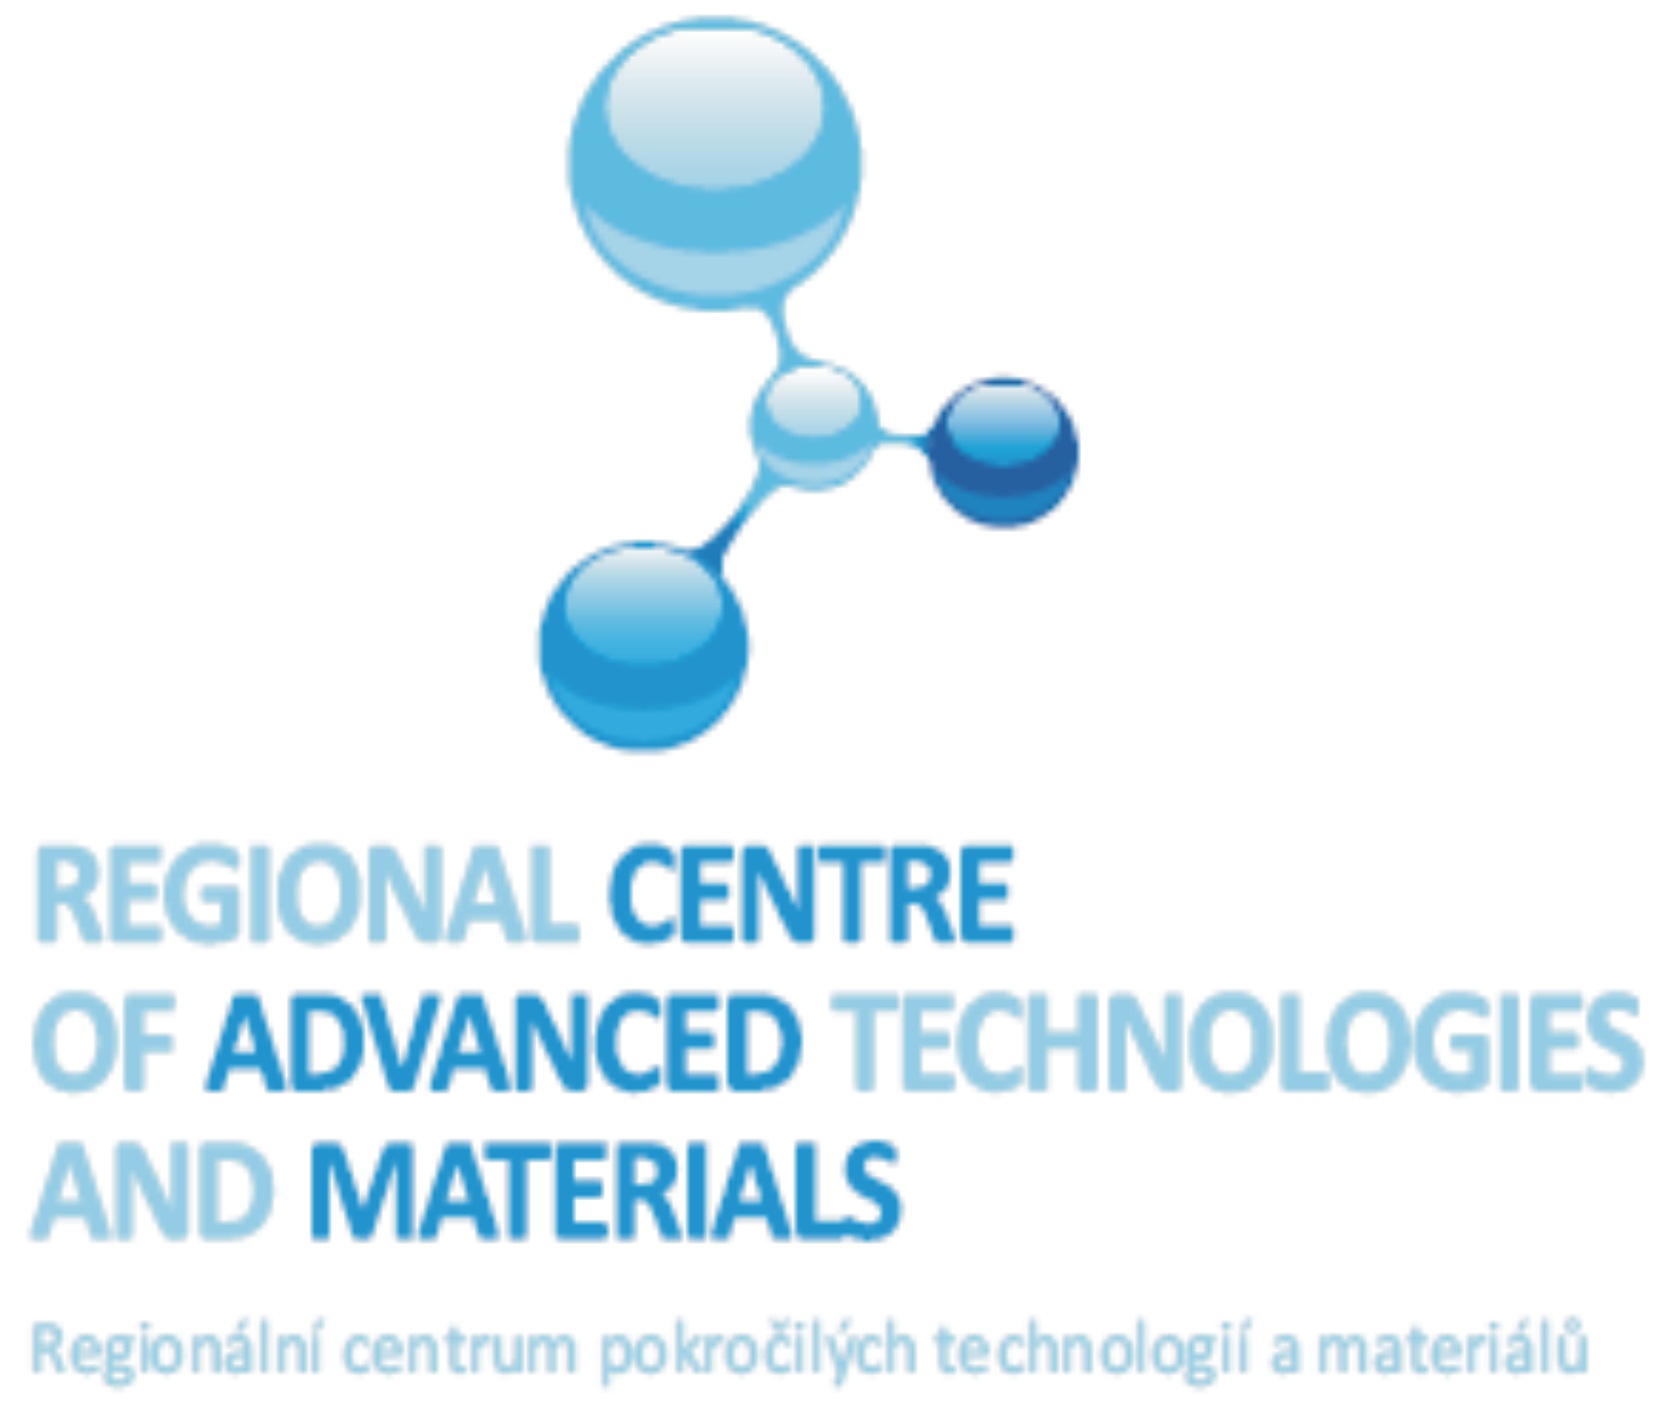 Regional Centre of Advanced Technologies and Materials